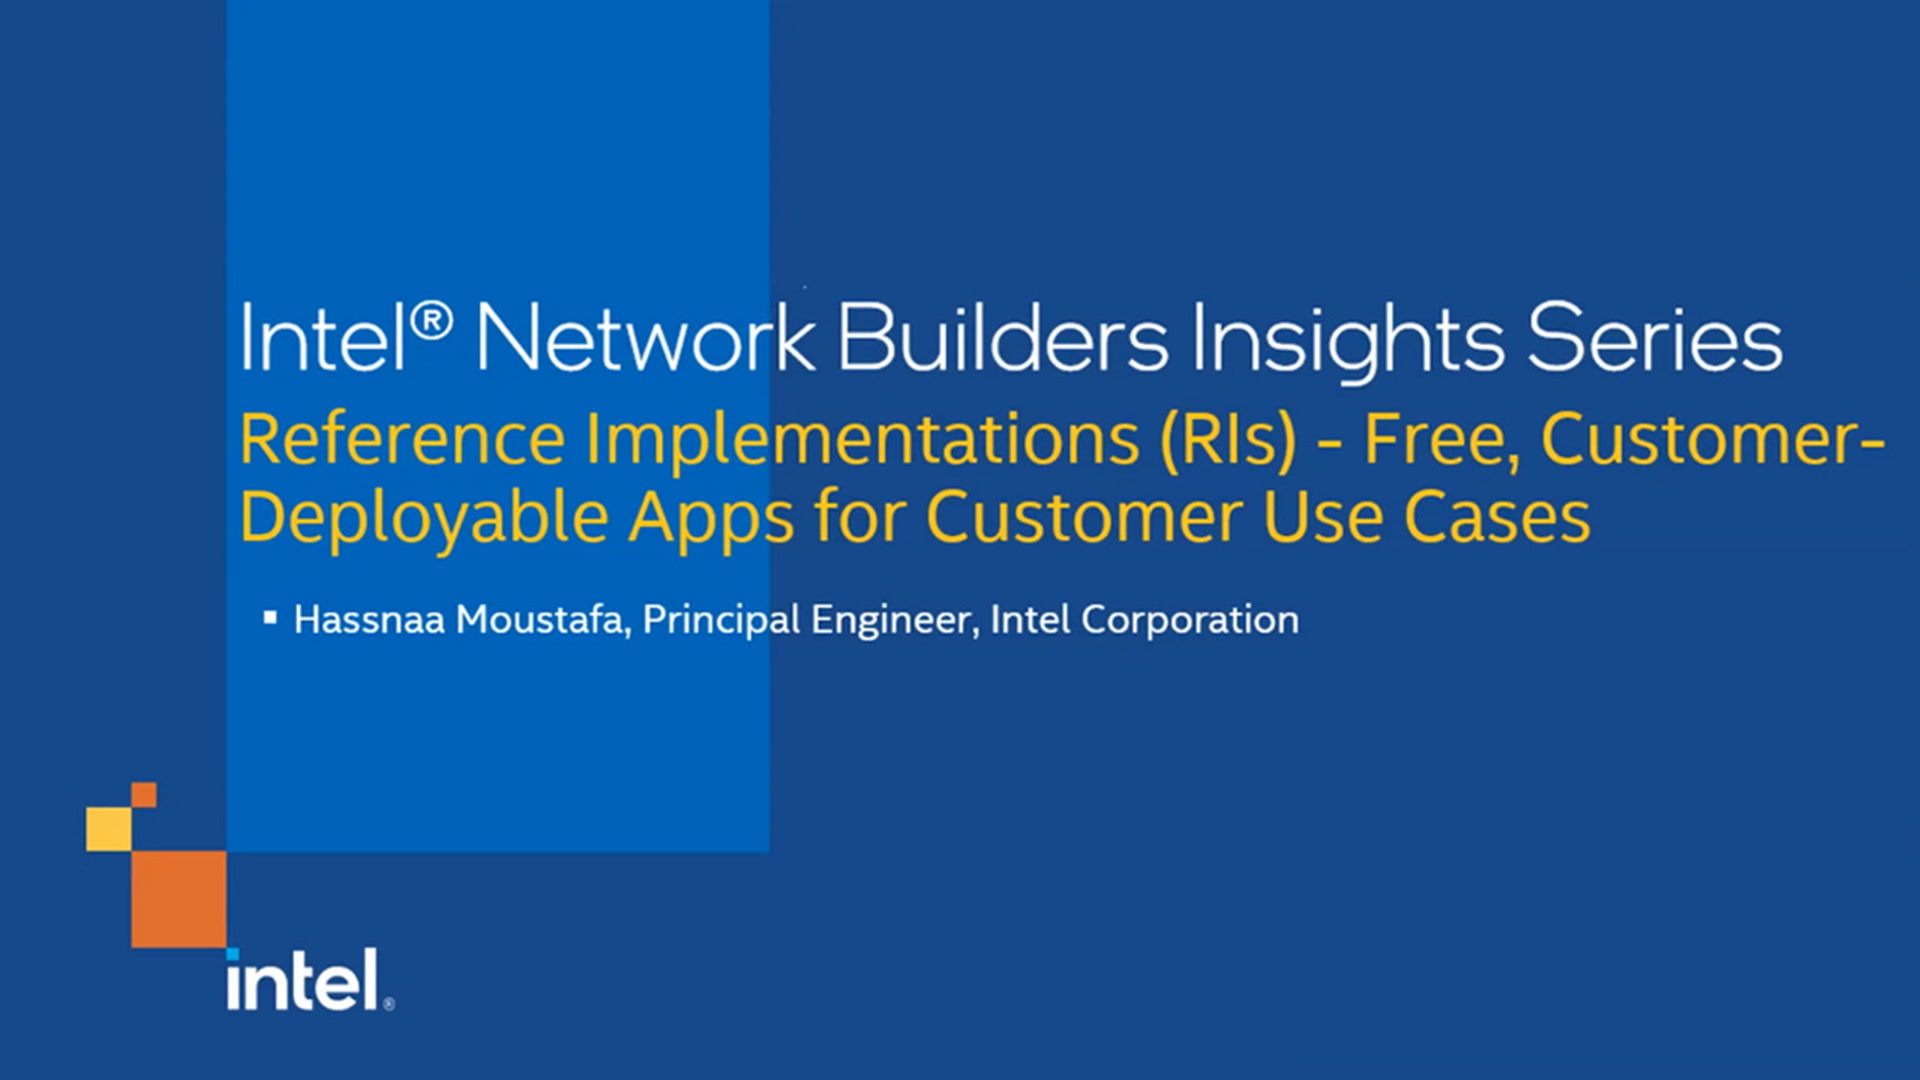 Reference Implementations- Free, Customer-Deployable Apps for Customer Use Cases